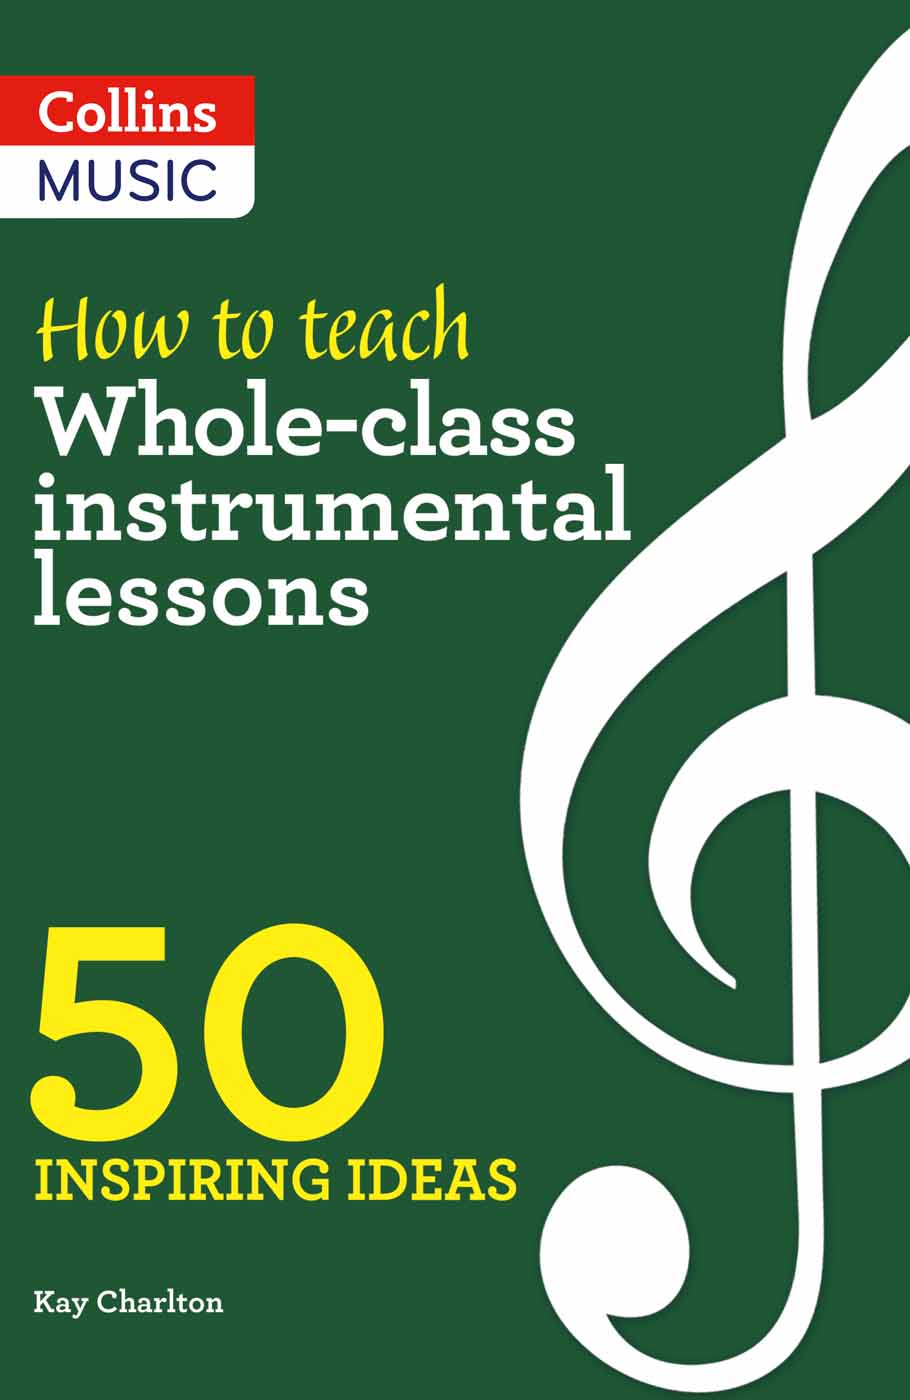 Kay Charlton: How to teach Whole-class instrumental lessons: Reference